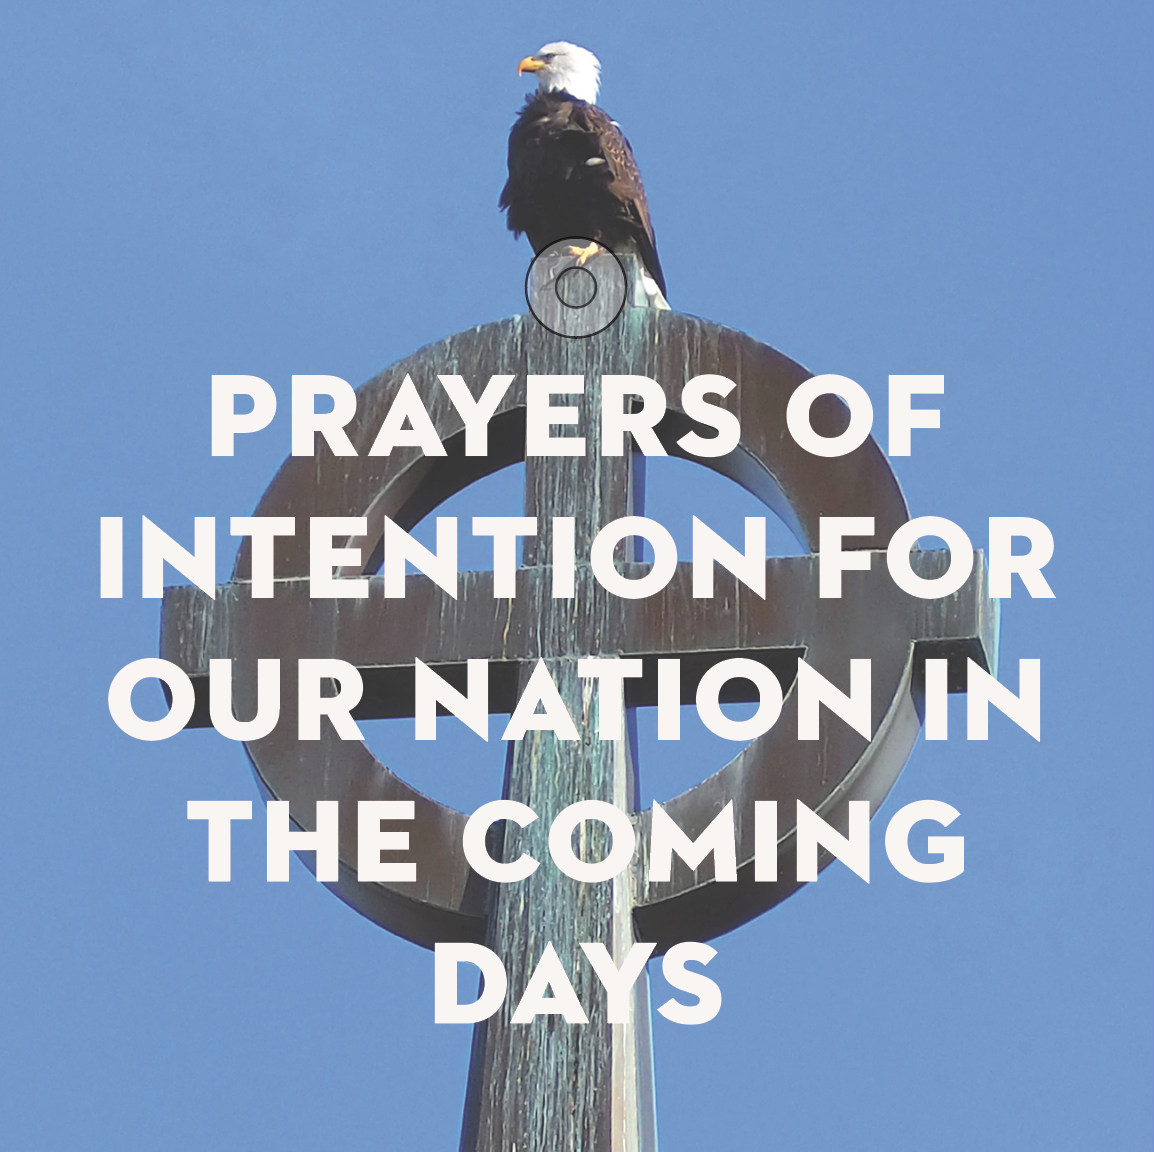 Prayers of Intention for our Nation in the Coming Days